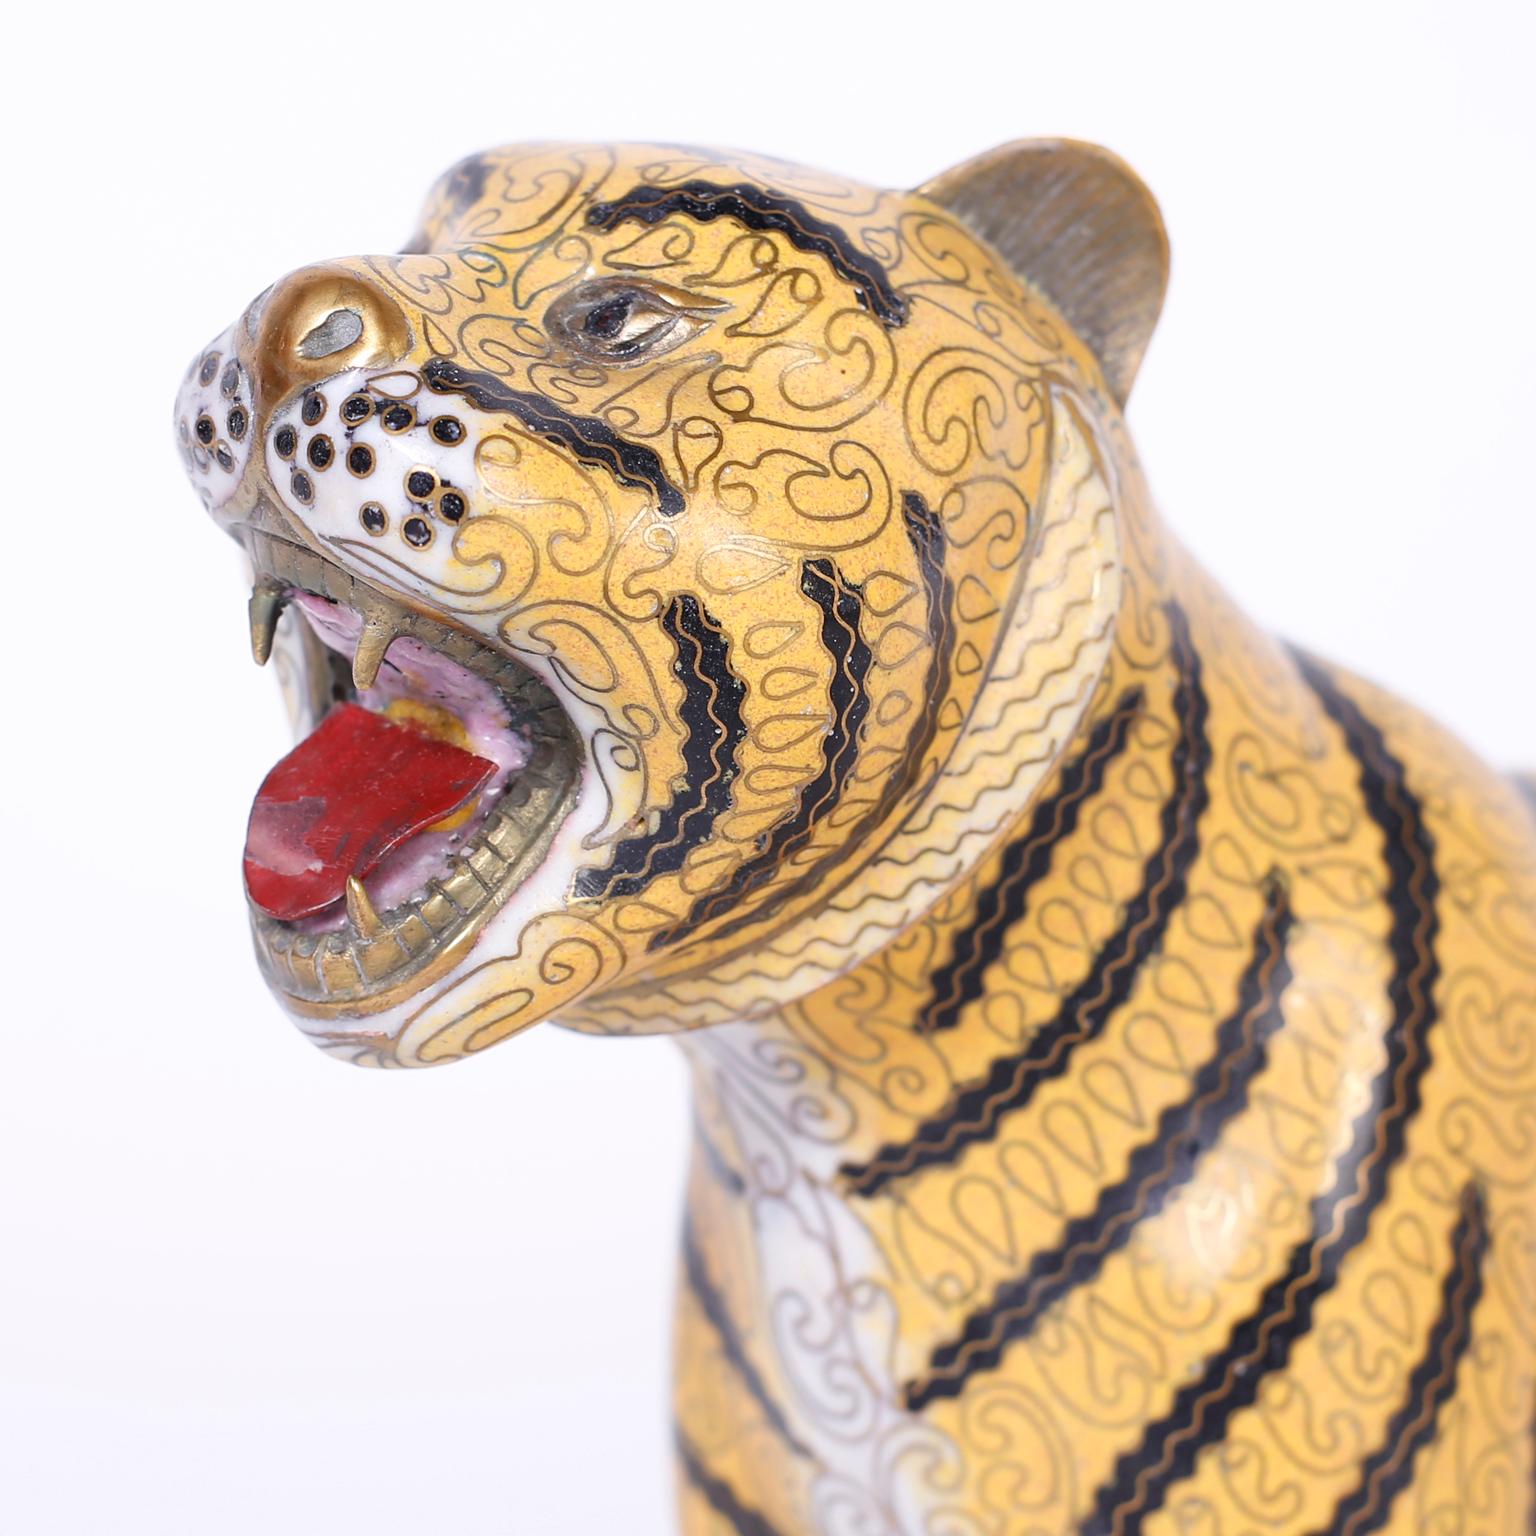 Rare antique Chinese tiger crafted with brass and enamel with striking elaborate detail in a familiar ferocious pose.